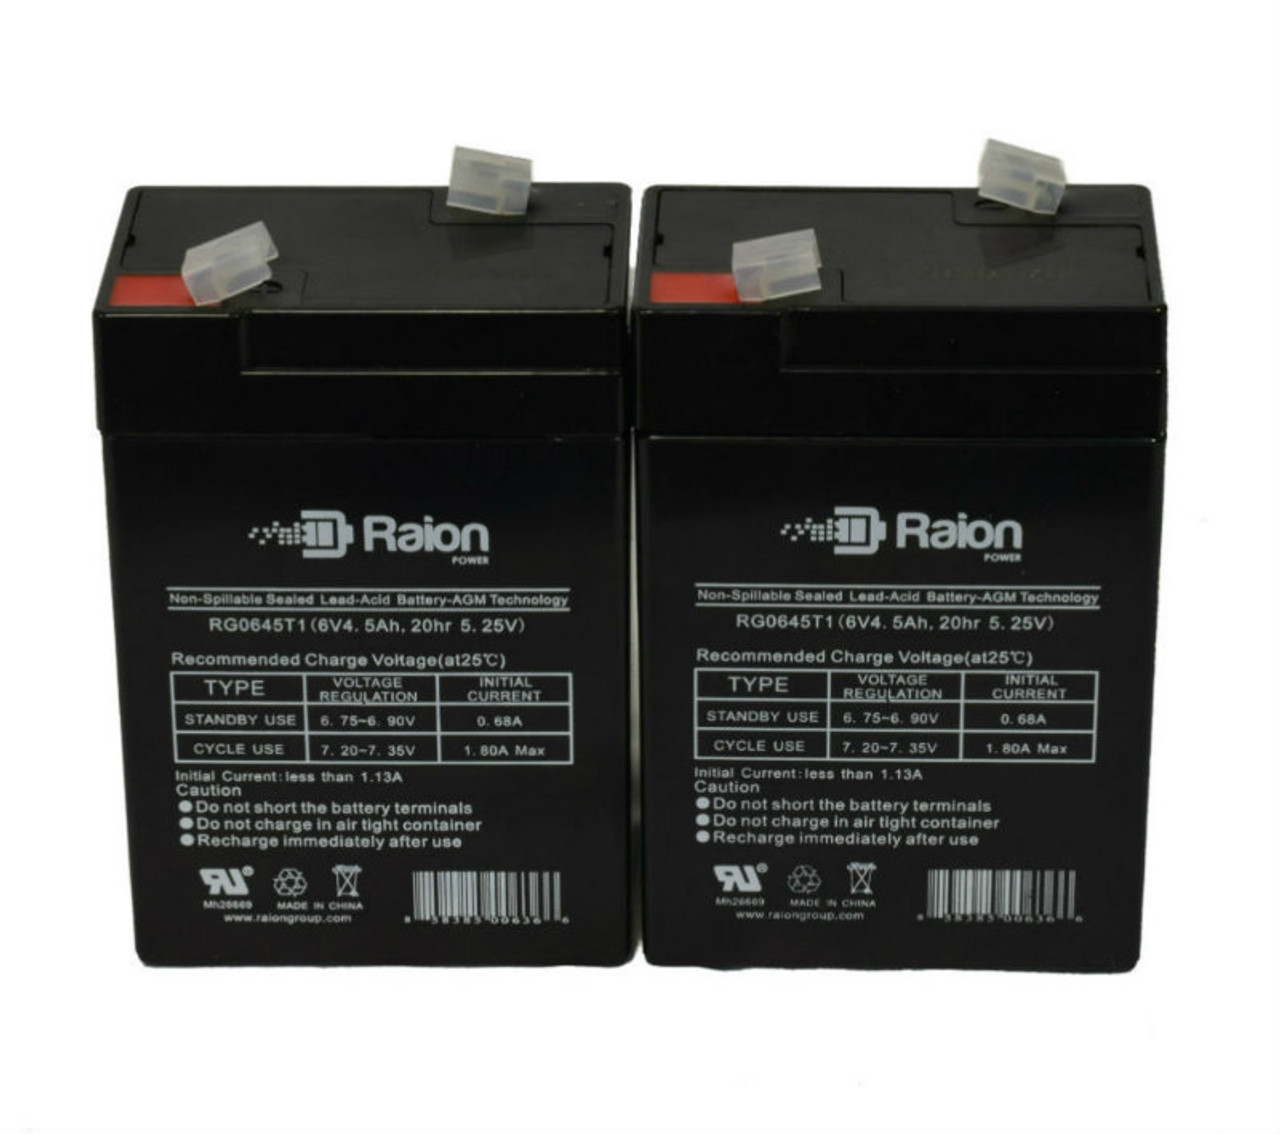 Raion Power 6V 4.5Ah Replacement Emergency Light Battery for Big Beam 2IL6S50 - 2 Pack